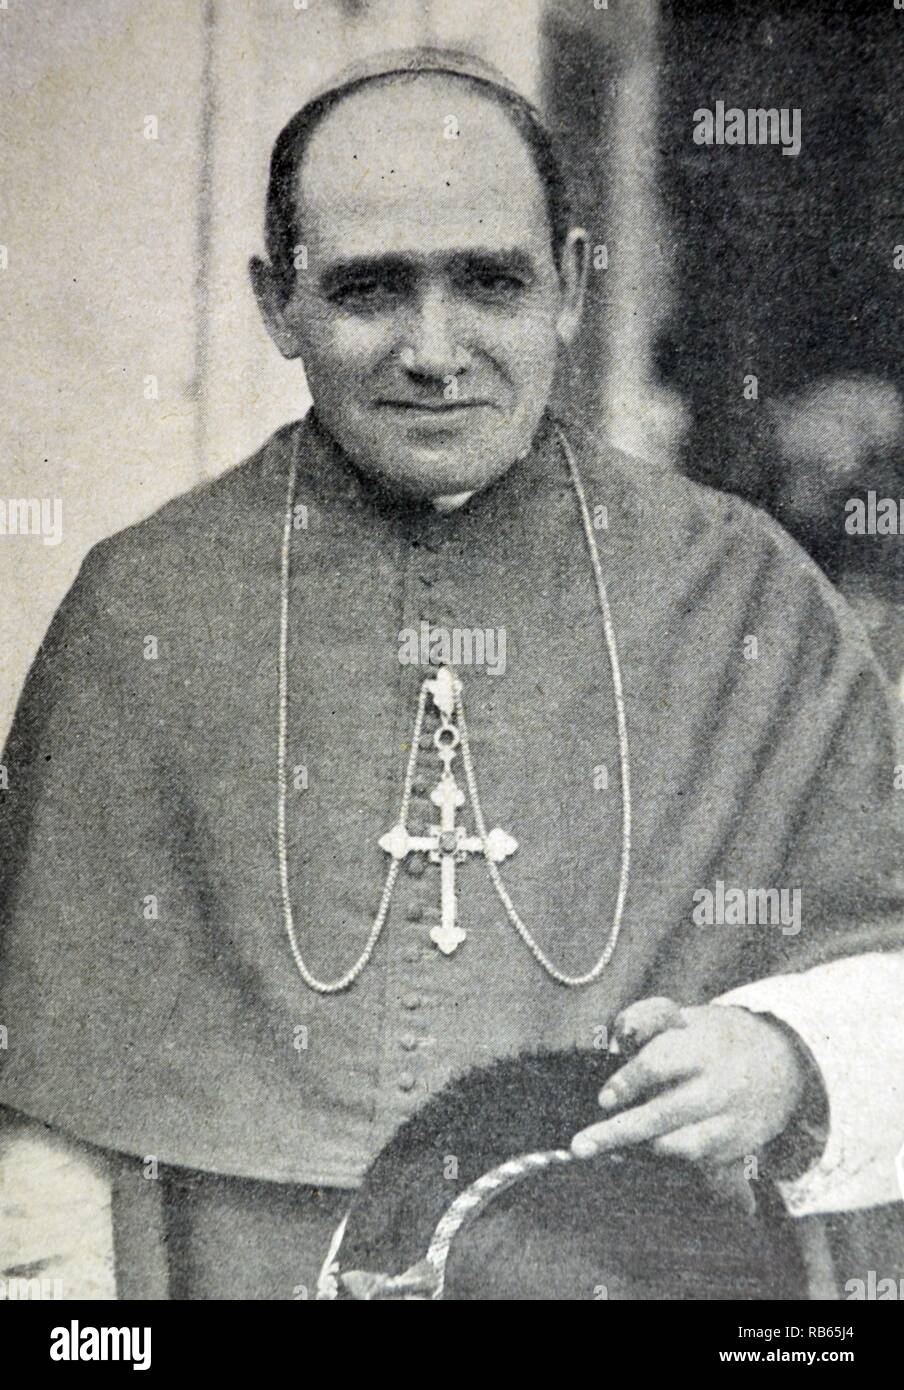 Pedro Segura y SA!enz (4 December 1880-8 April 1957) was a Spanish Cardinal of the Roman Catholic Church who served as Archbishop of Toledo from 1927 to 1931, and Archbishop of Seville from 1937 until his death. Segura was elevated to the cardinalate in 1927. Stock Photo